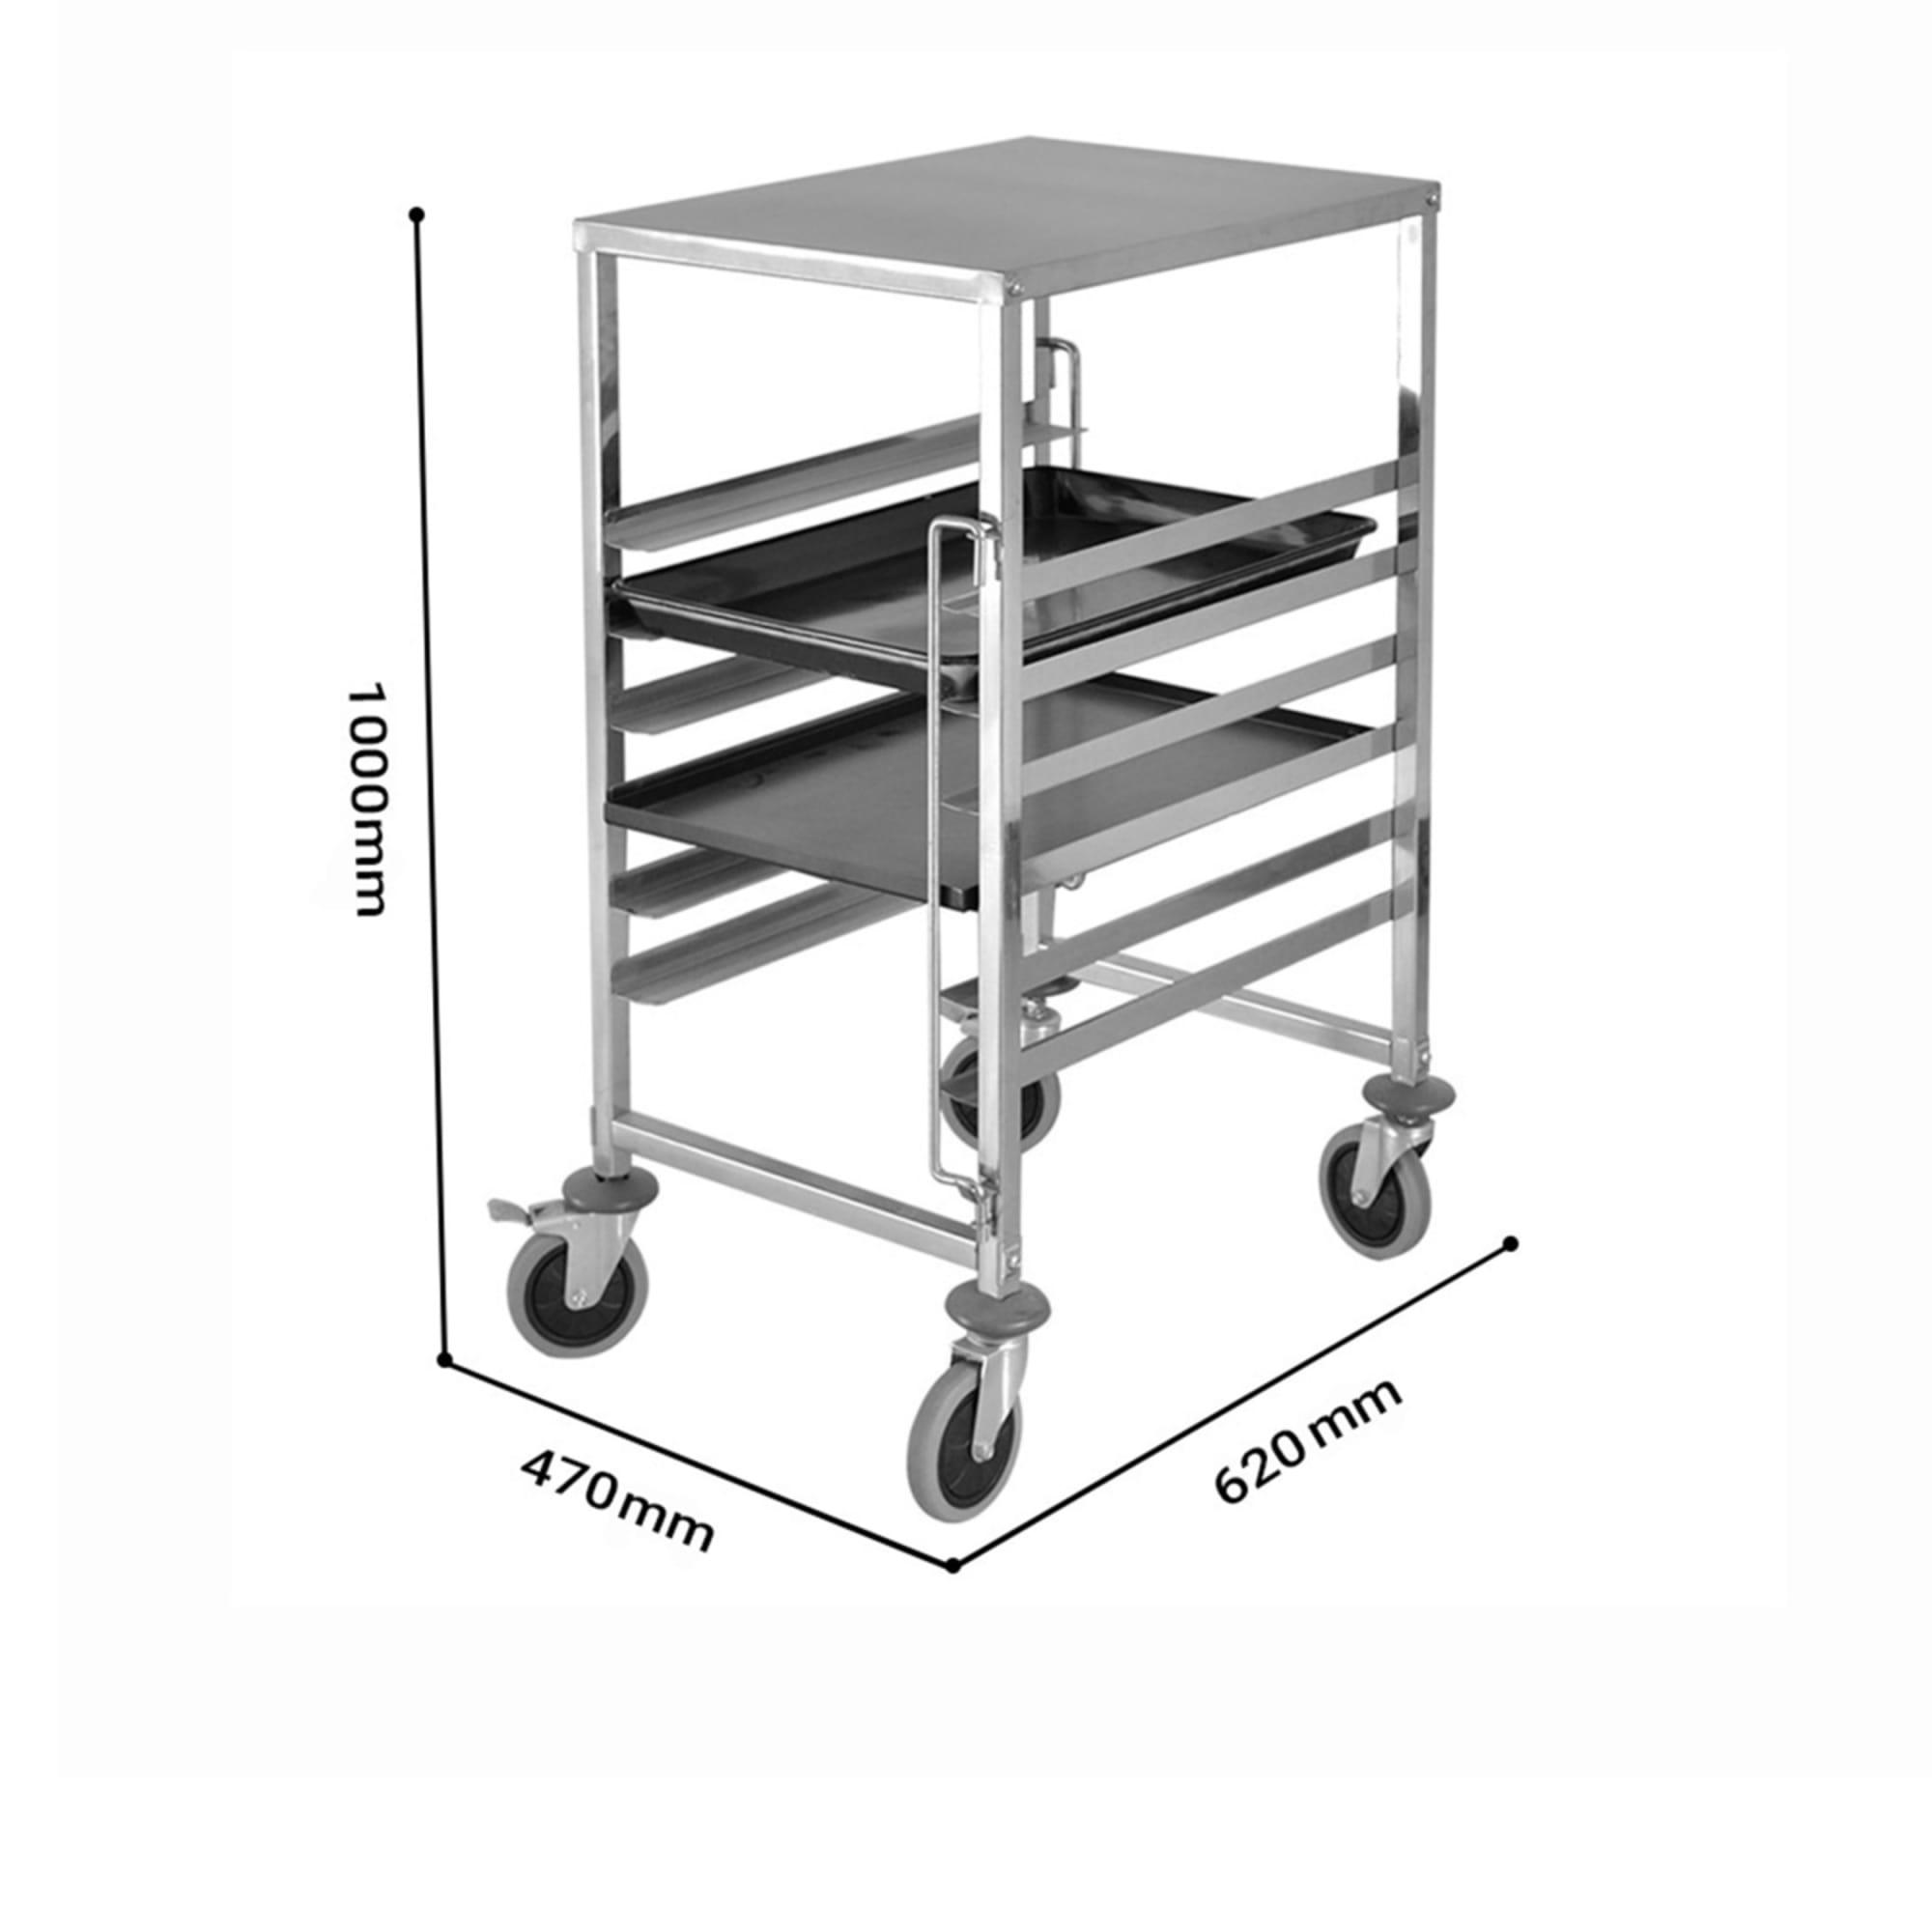 Soga Stainless Steel Gastronorm Trolley 7 Tier Suits 60x40cm Trays Set of 2 Image 5